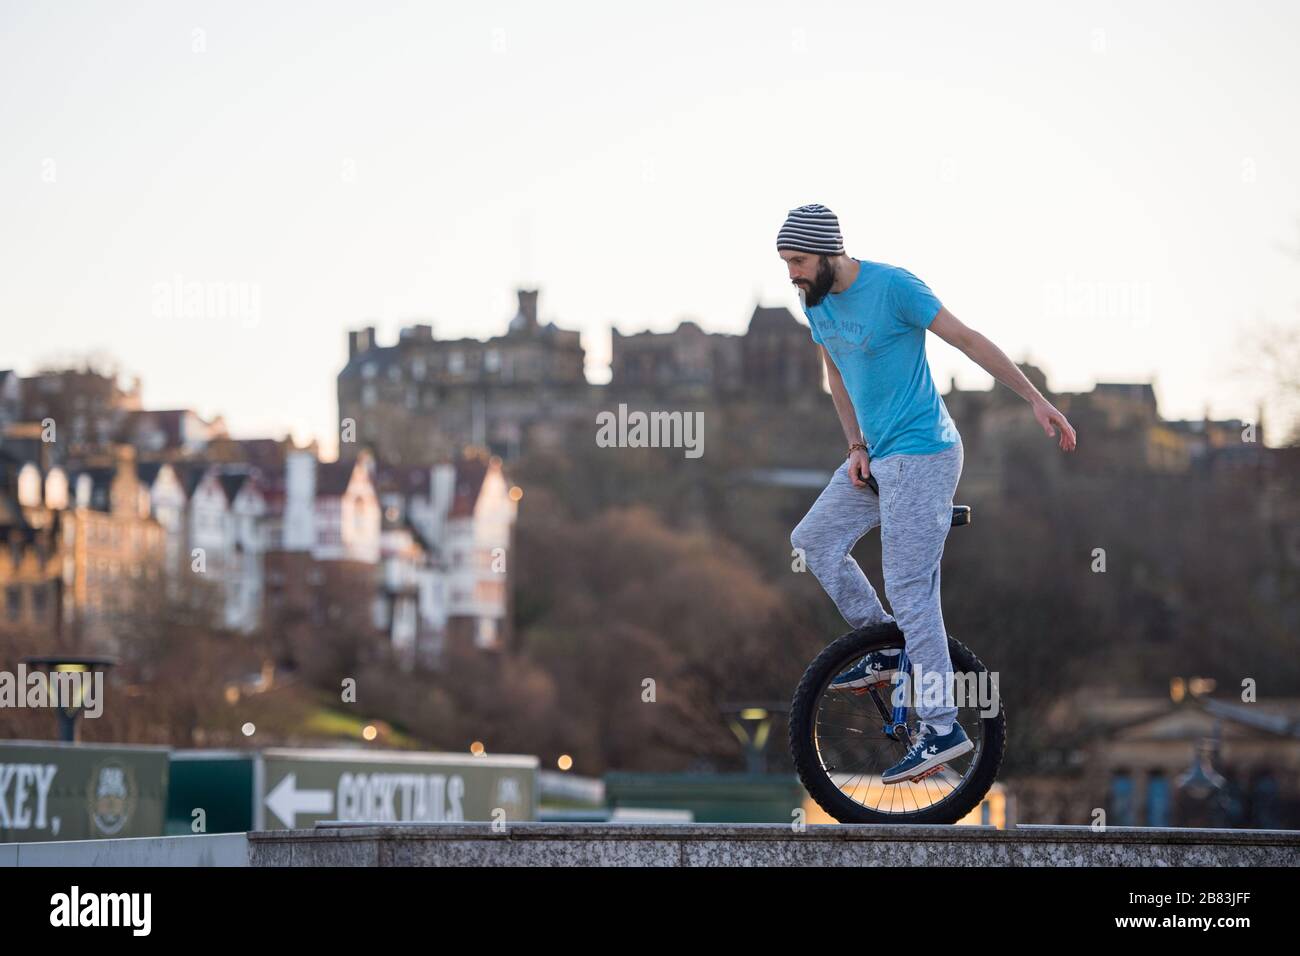 Edinburgh, UK. 19th Mar, 2020. Pictured: Andrew Buchan, a stunt and extreme unicyclist passes the time during what would normally be a busy rush hour in Edinburgh, but due to the Coronavirus pandemic the city centre is extremely quiet. People are now faced with doing different things with their time during self isolation. The Scott Monument is seen in the background which is a major landmark in Edinburgh. Credit: Colin Fisher/Alamy Live News Stock Photo